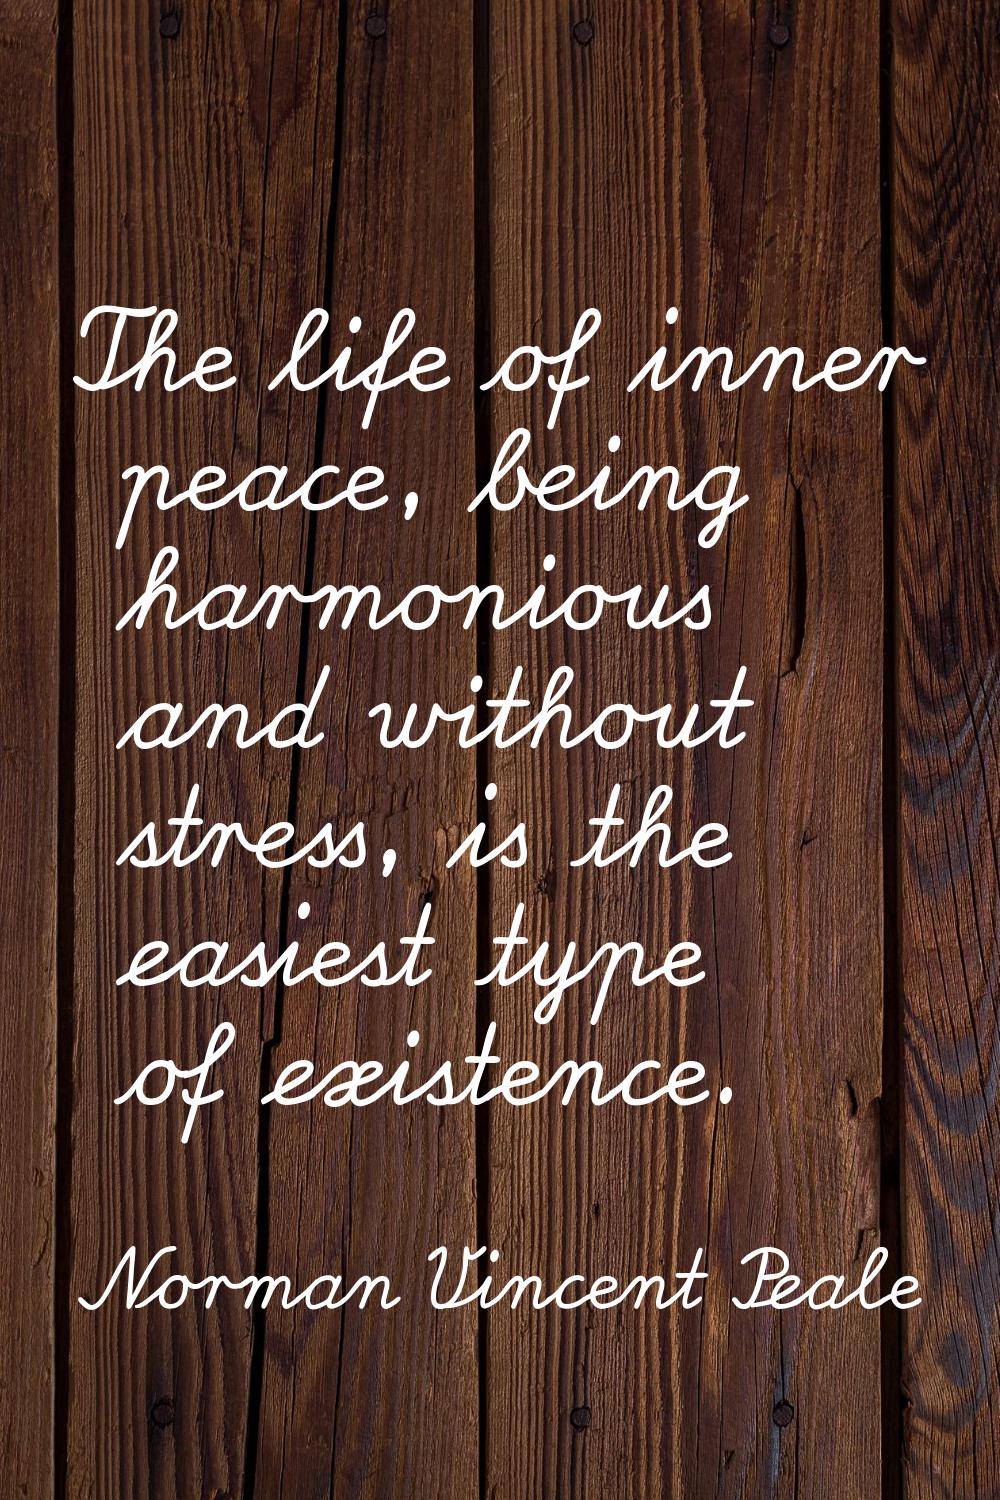 The life of inner peace, being harmonious and without stress, is the easiest type of existence.